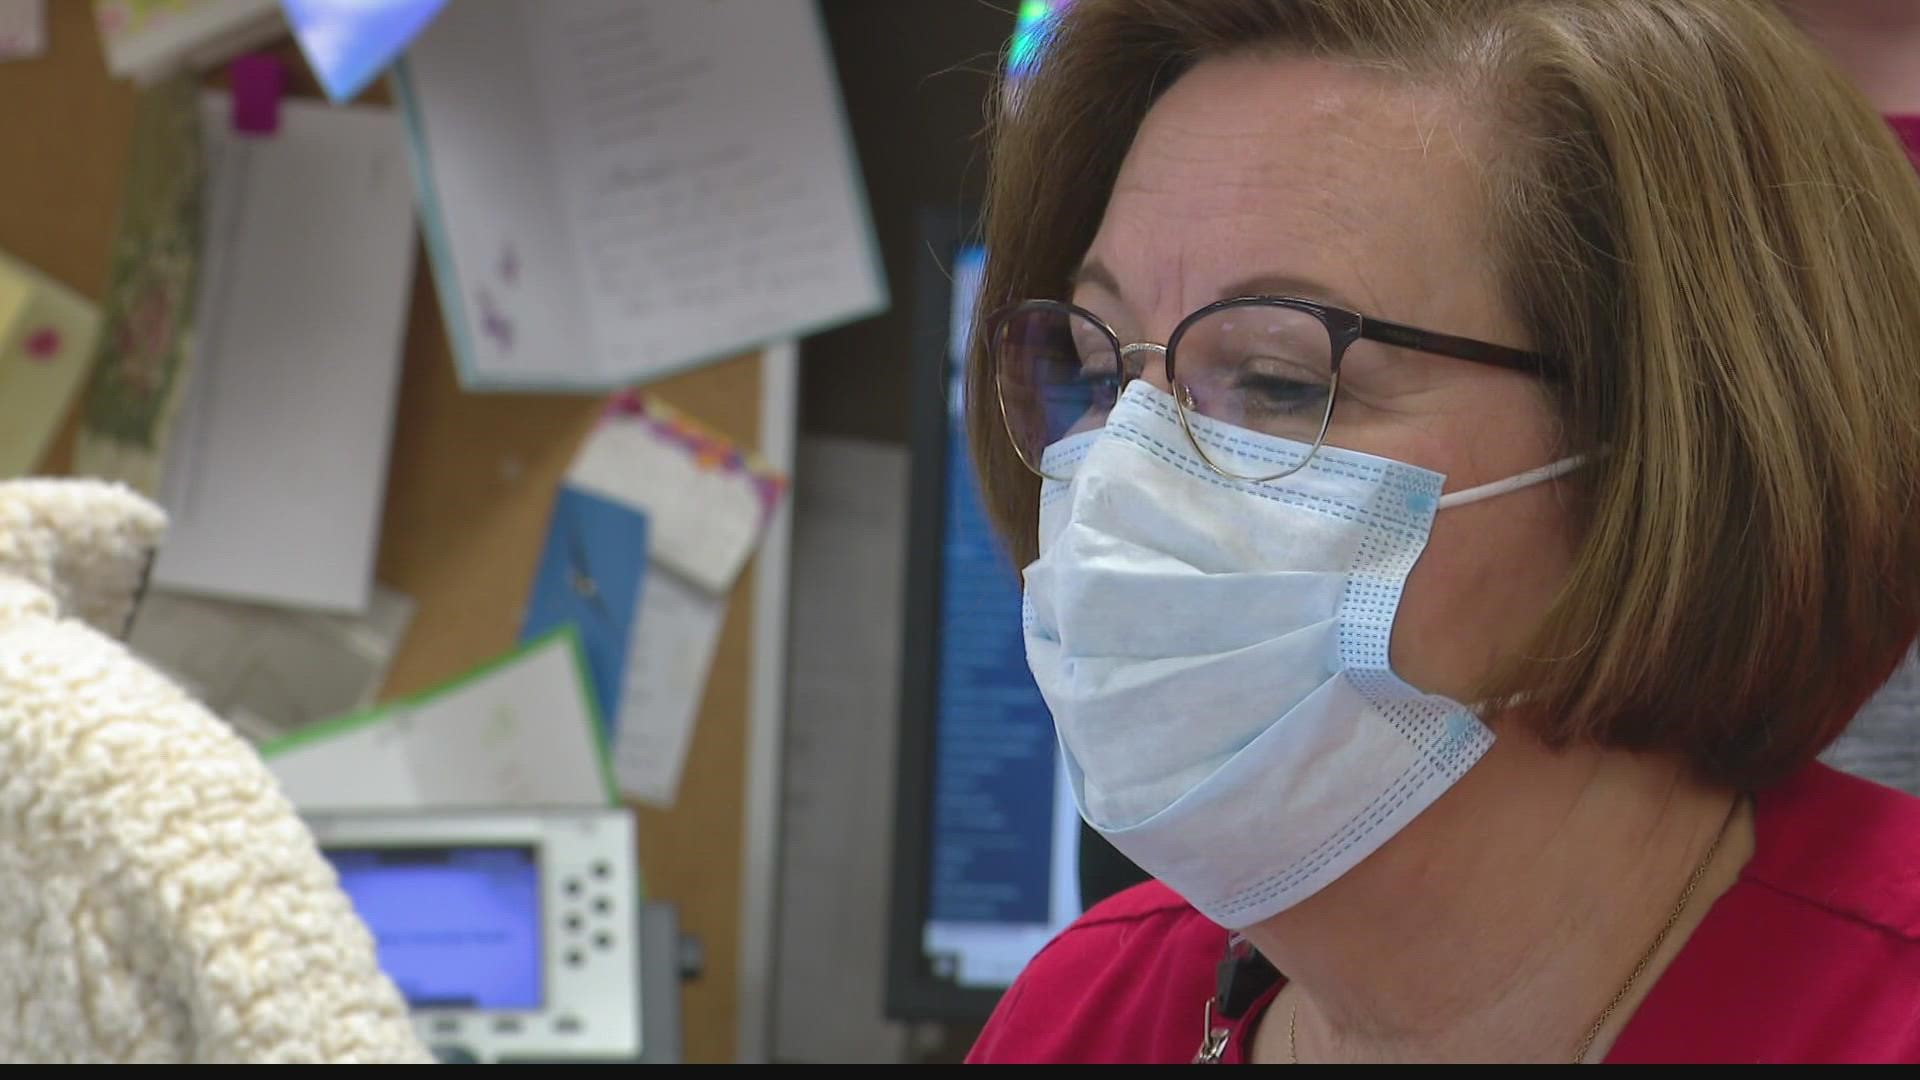 It’s a second shot at life for Sandy Miller, the team lead at IU Health's Central Indiana Cancer Center, after she ditched her corporate career 16 years ago.